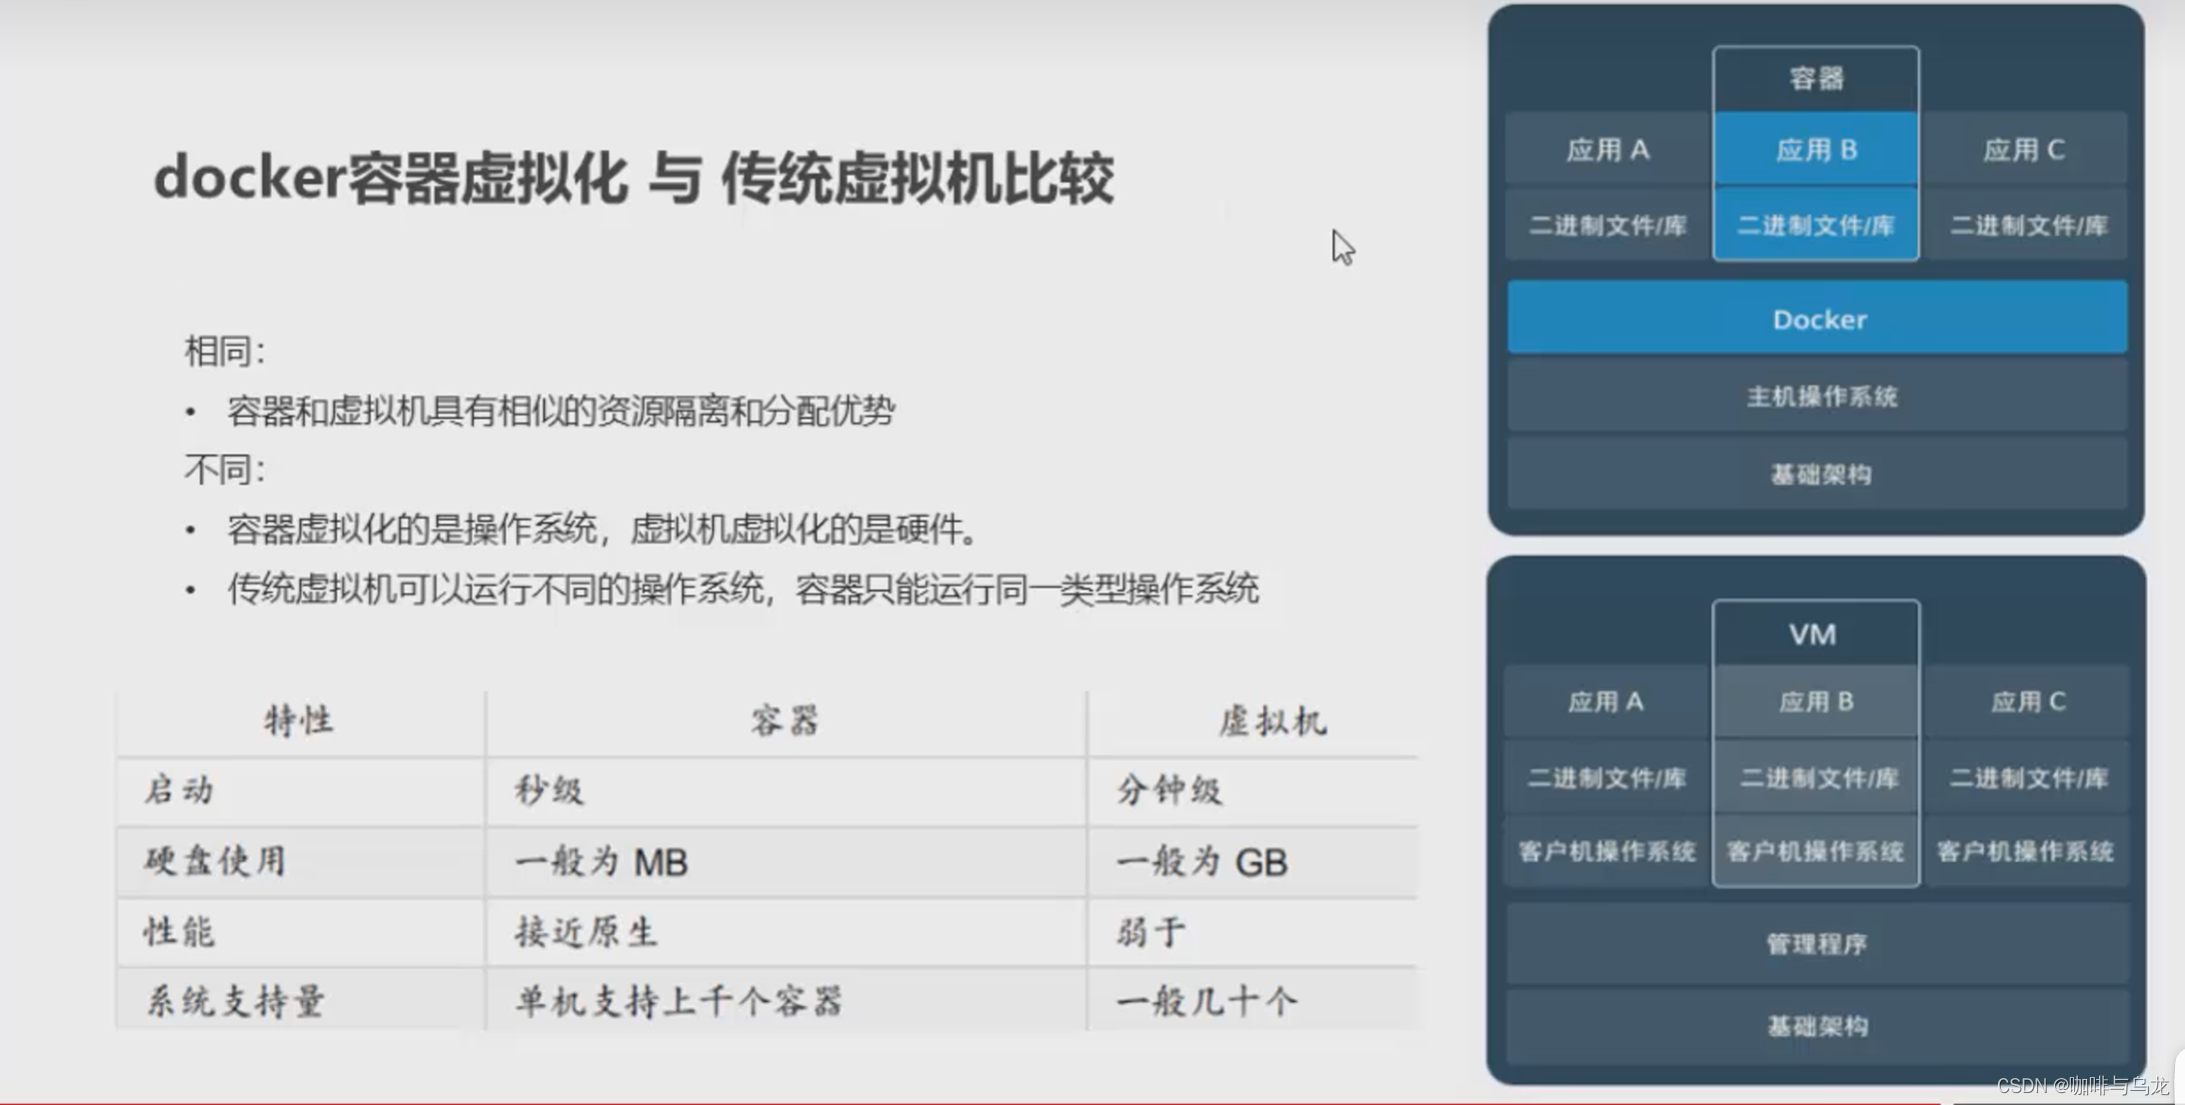 [External link picture transfer failed, the source site may have an anti-theft link mechanism, it is recommended to save the picture and upload it directly (img-db82Ropo-1691217727222) (C:\Users\DongZhaoCheng\AppData\Roaming\Typora\typora-user-images\ image-20230804162342804.png)]